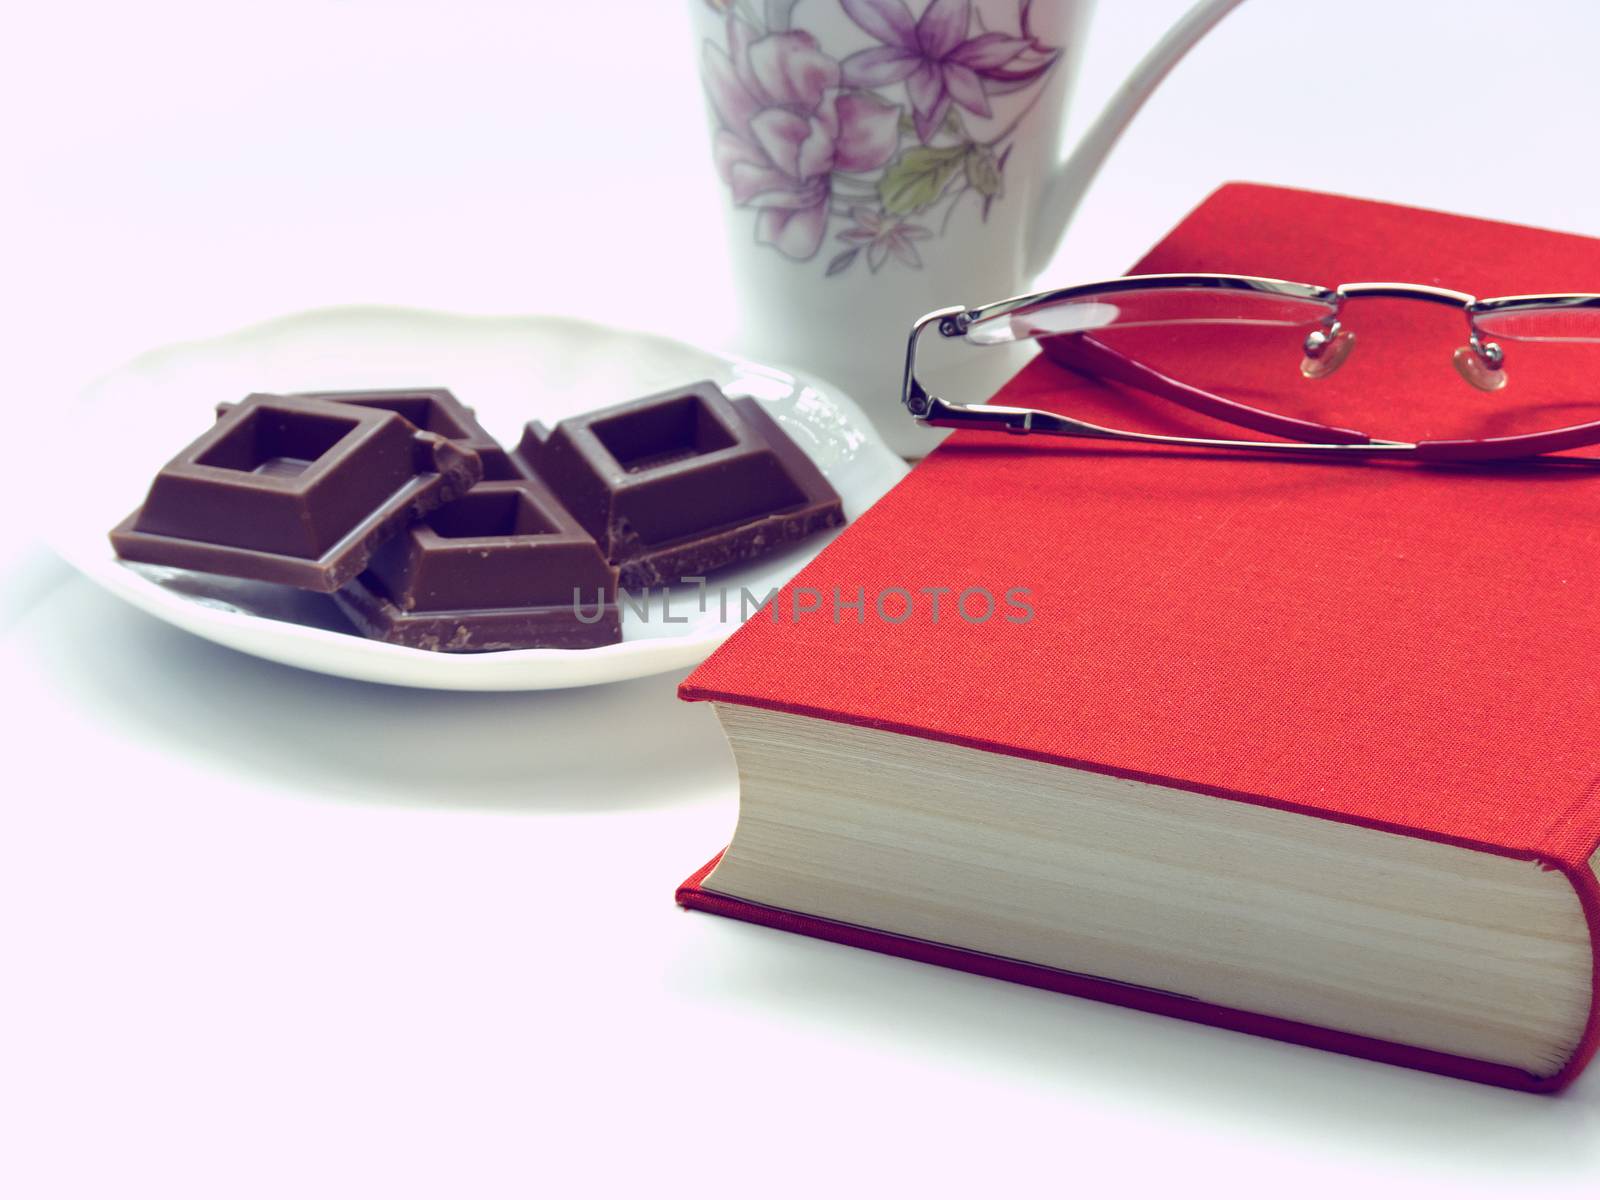 Time to relax - cup of coffee,chocolate,book and glasses , vintage look